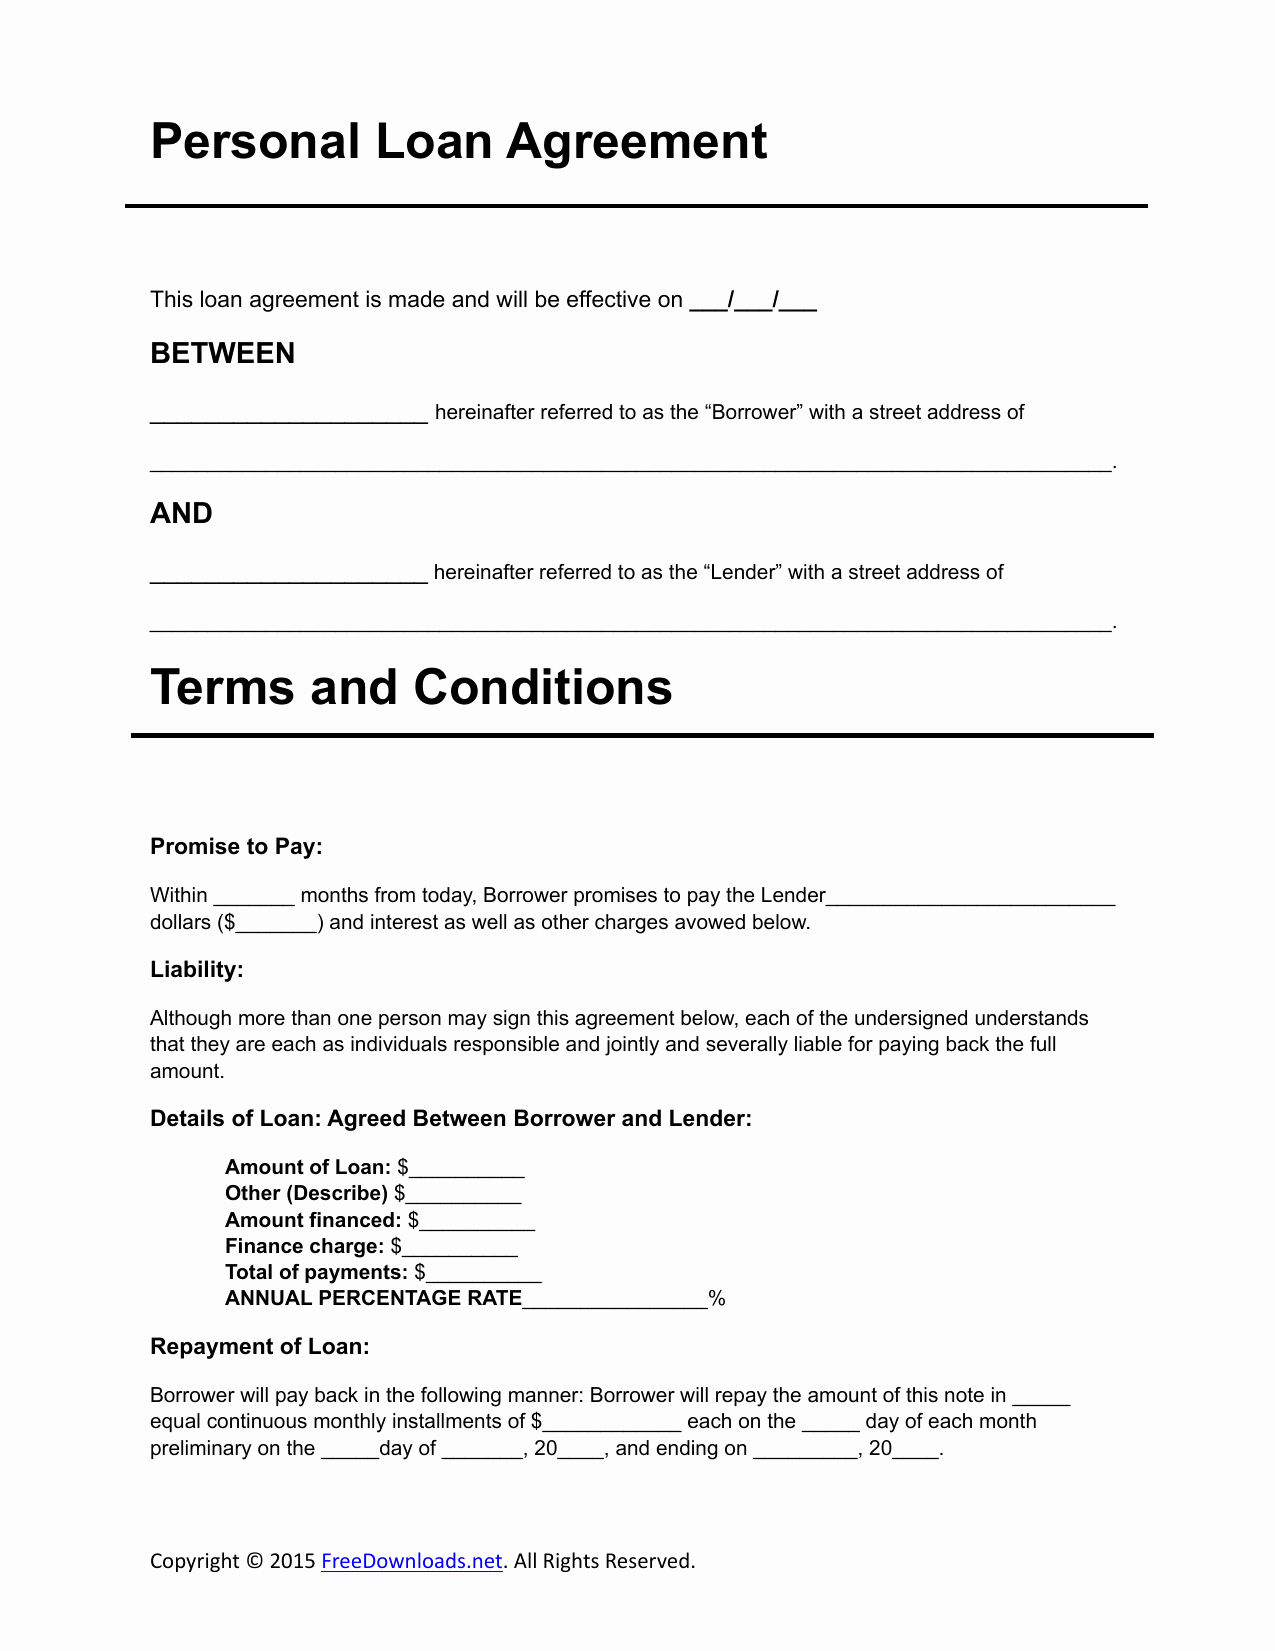 Loan Document Template Free Awesome Download Personal Loan Agreement Template Pdf